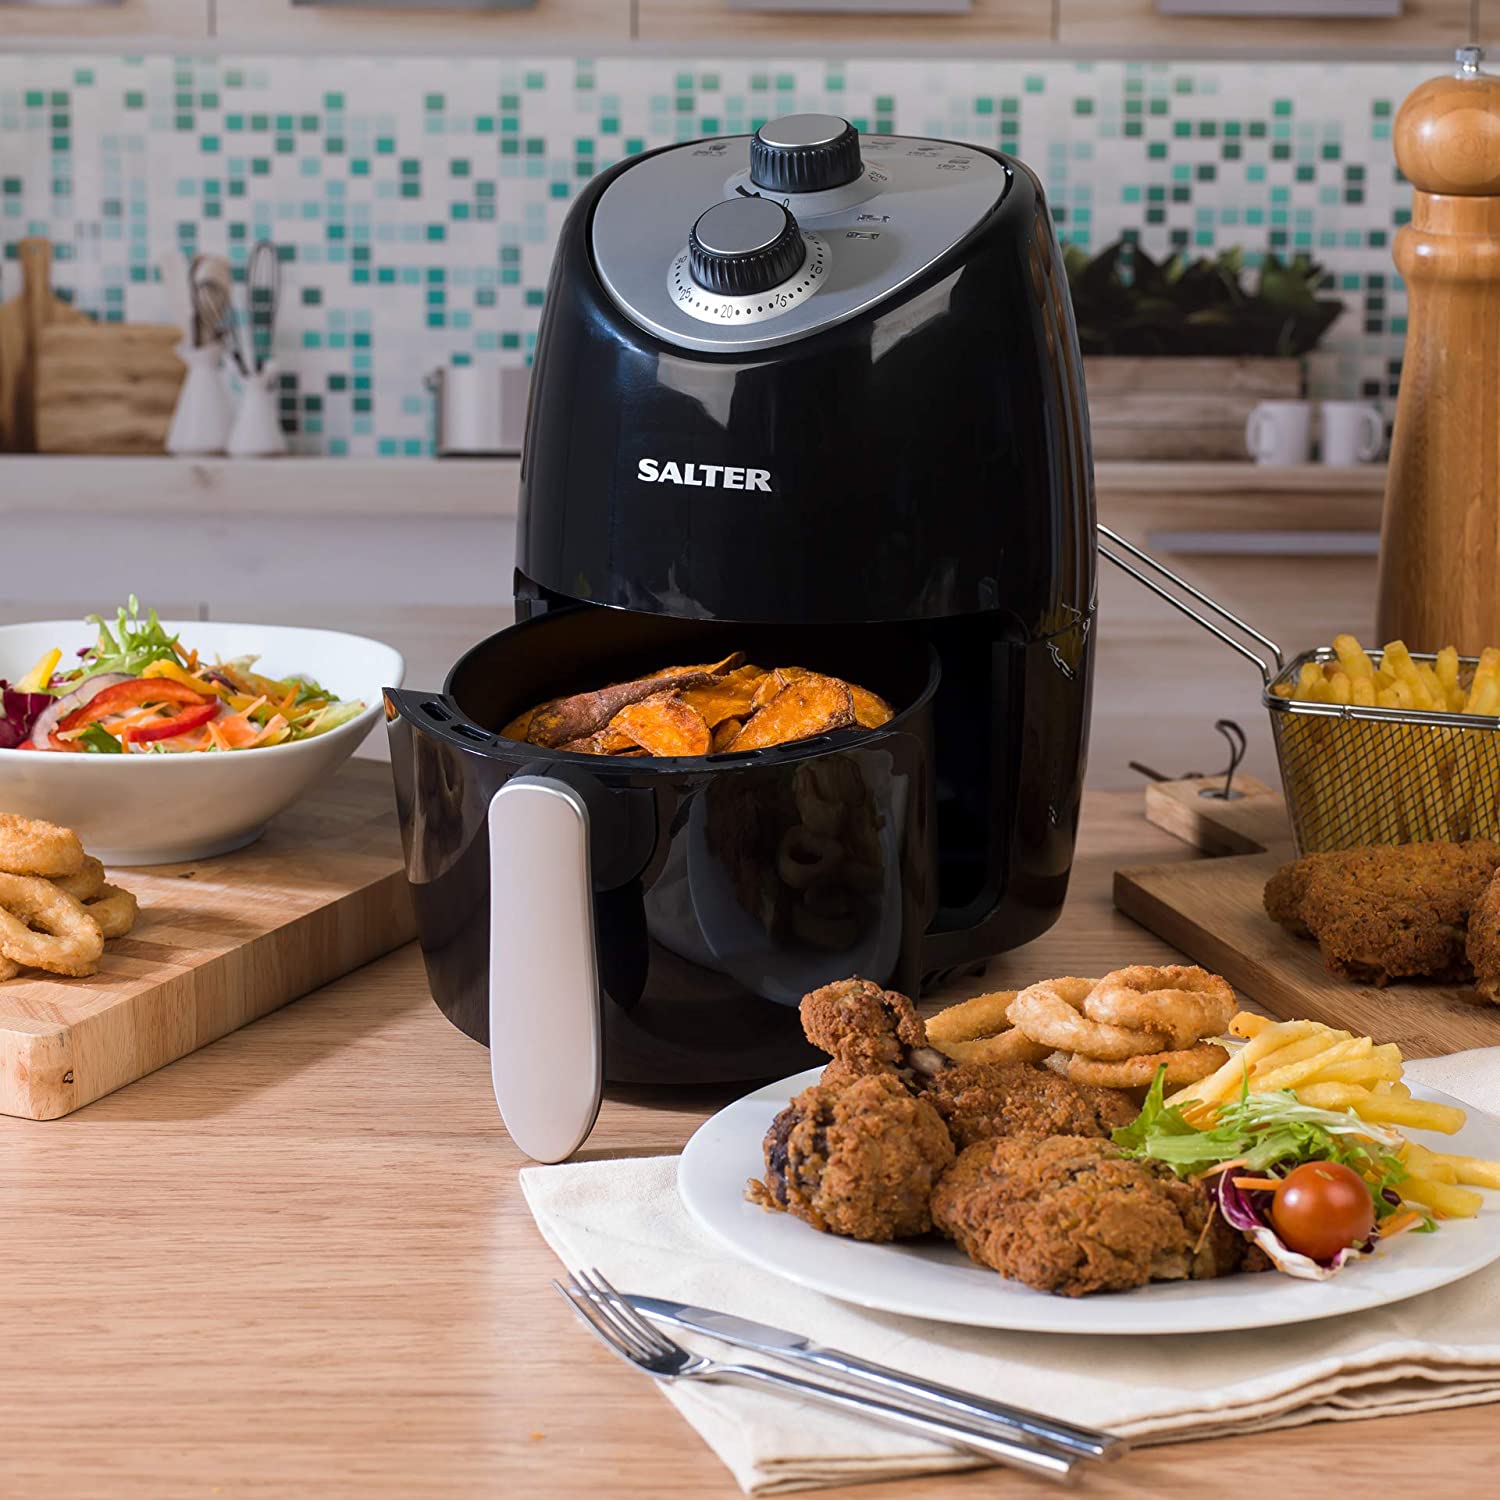 Salter EK2817 Compact 2L Hot Air Fryer with Removable Frying Rack, Adjustable Temperature Control, 30 Minute Timer, Auto Shut Off, 1000 W, Perfect For Small...